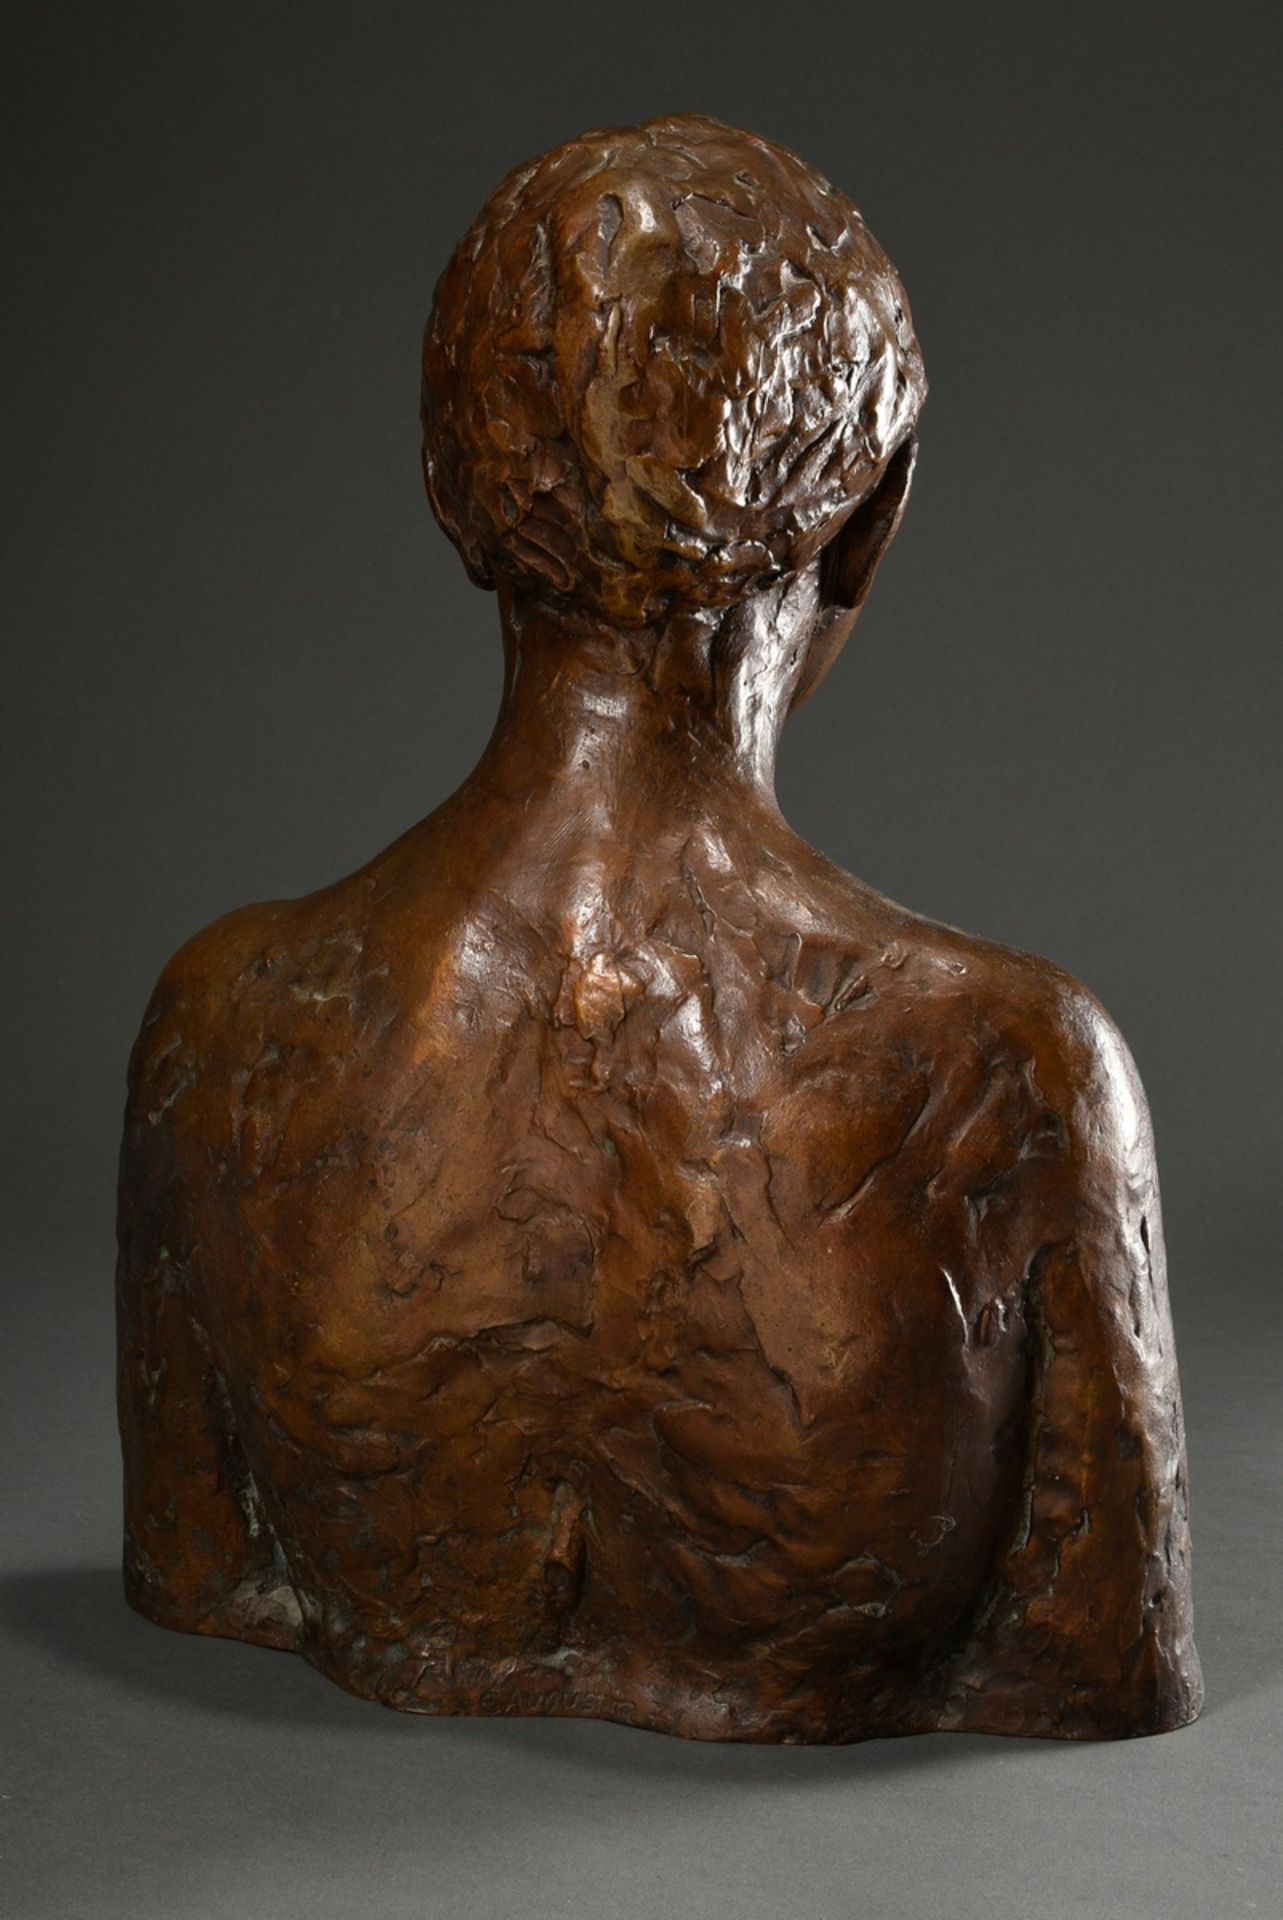 Augustin, Edgar (1936-1996) "Female Bust" 1971, verso sign./dat., bronze with brownish patina, cast - Image 4 of 7